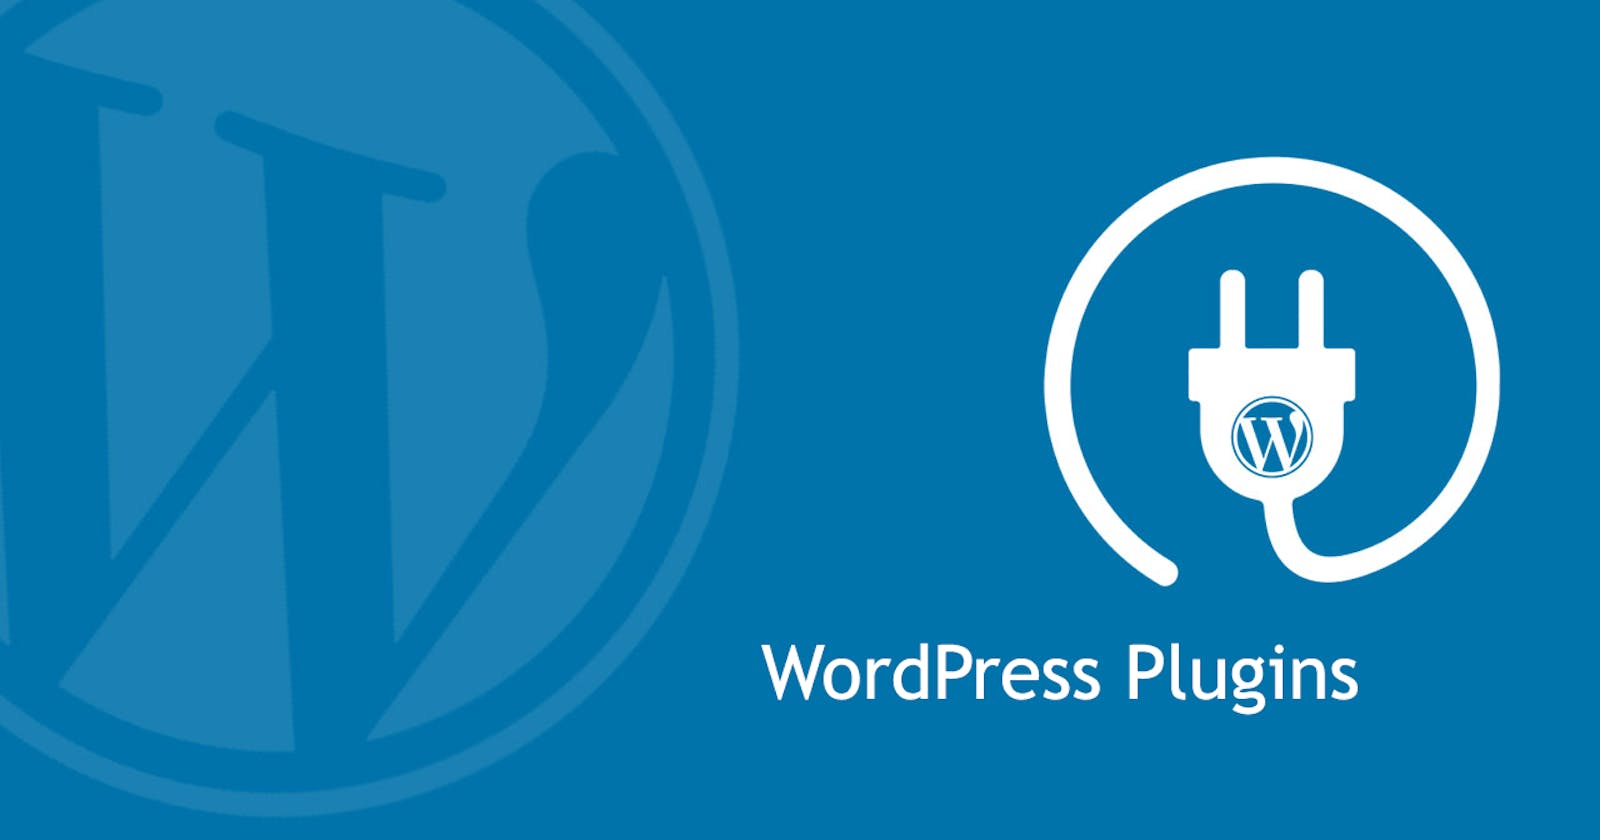 WordPress Plugins to Boost Your Site